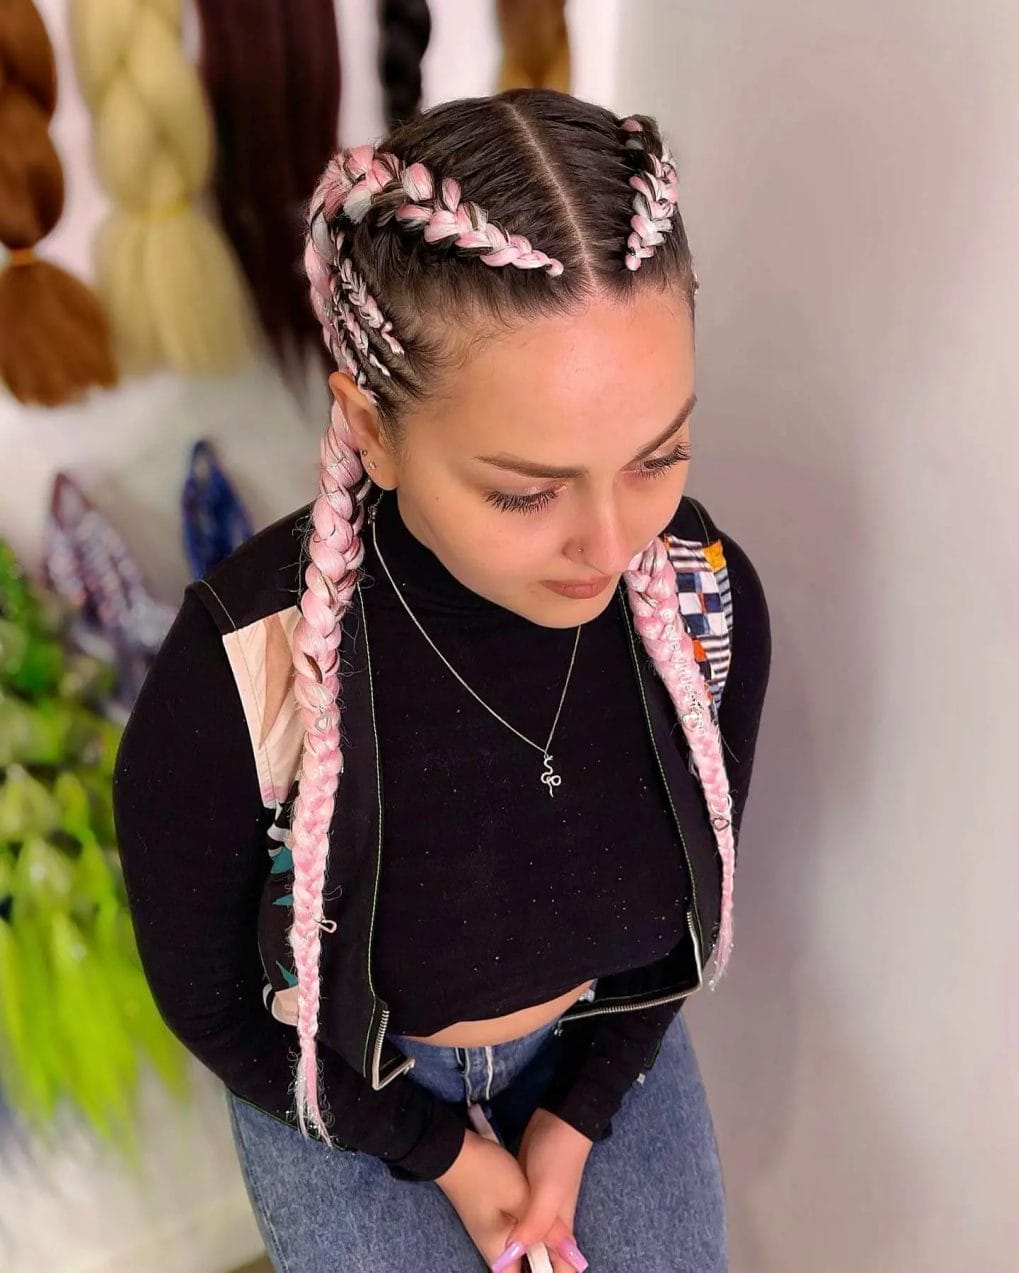 Neat Dutch braids with soft pink extensions, blending classic braiding with festival color pops.